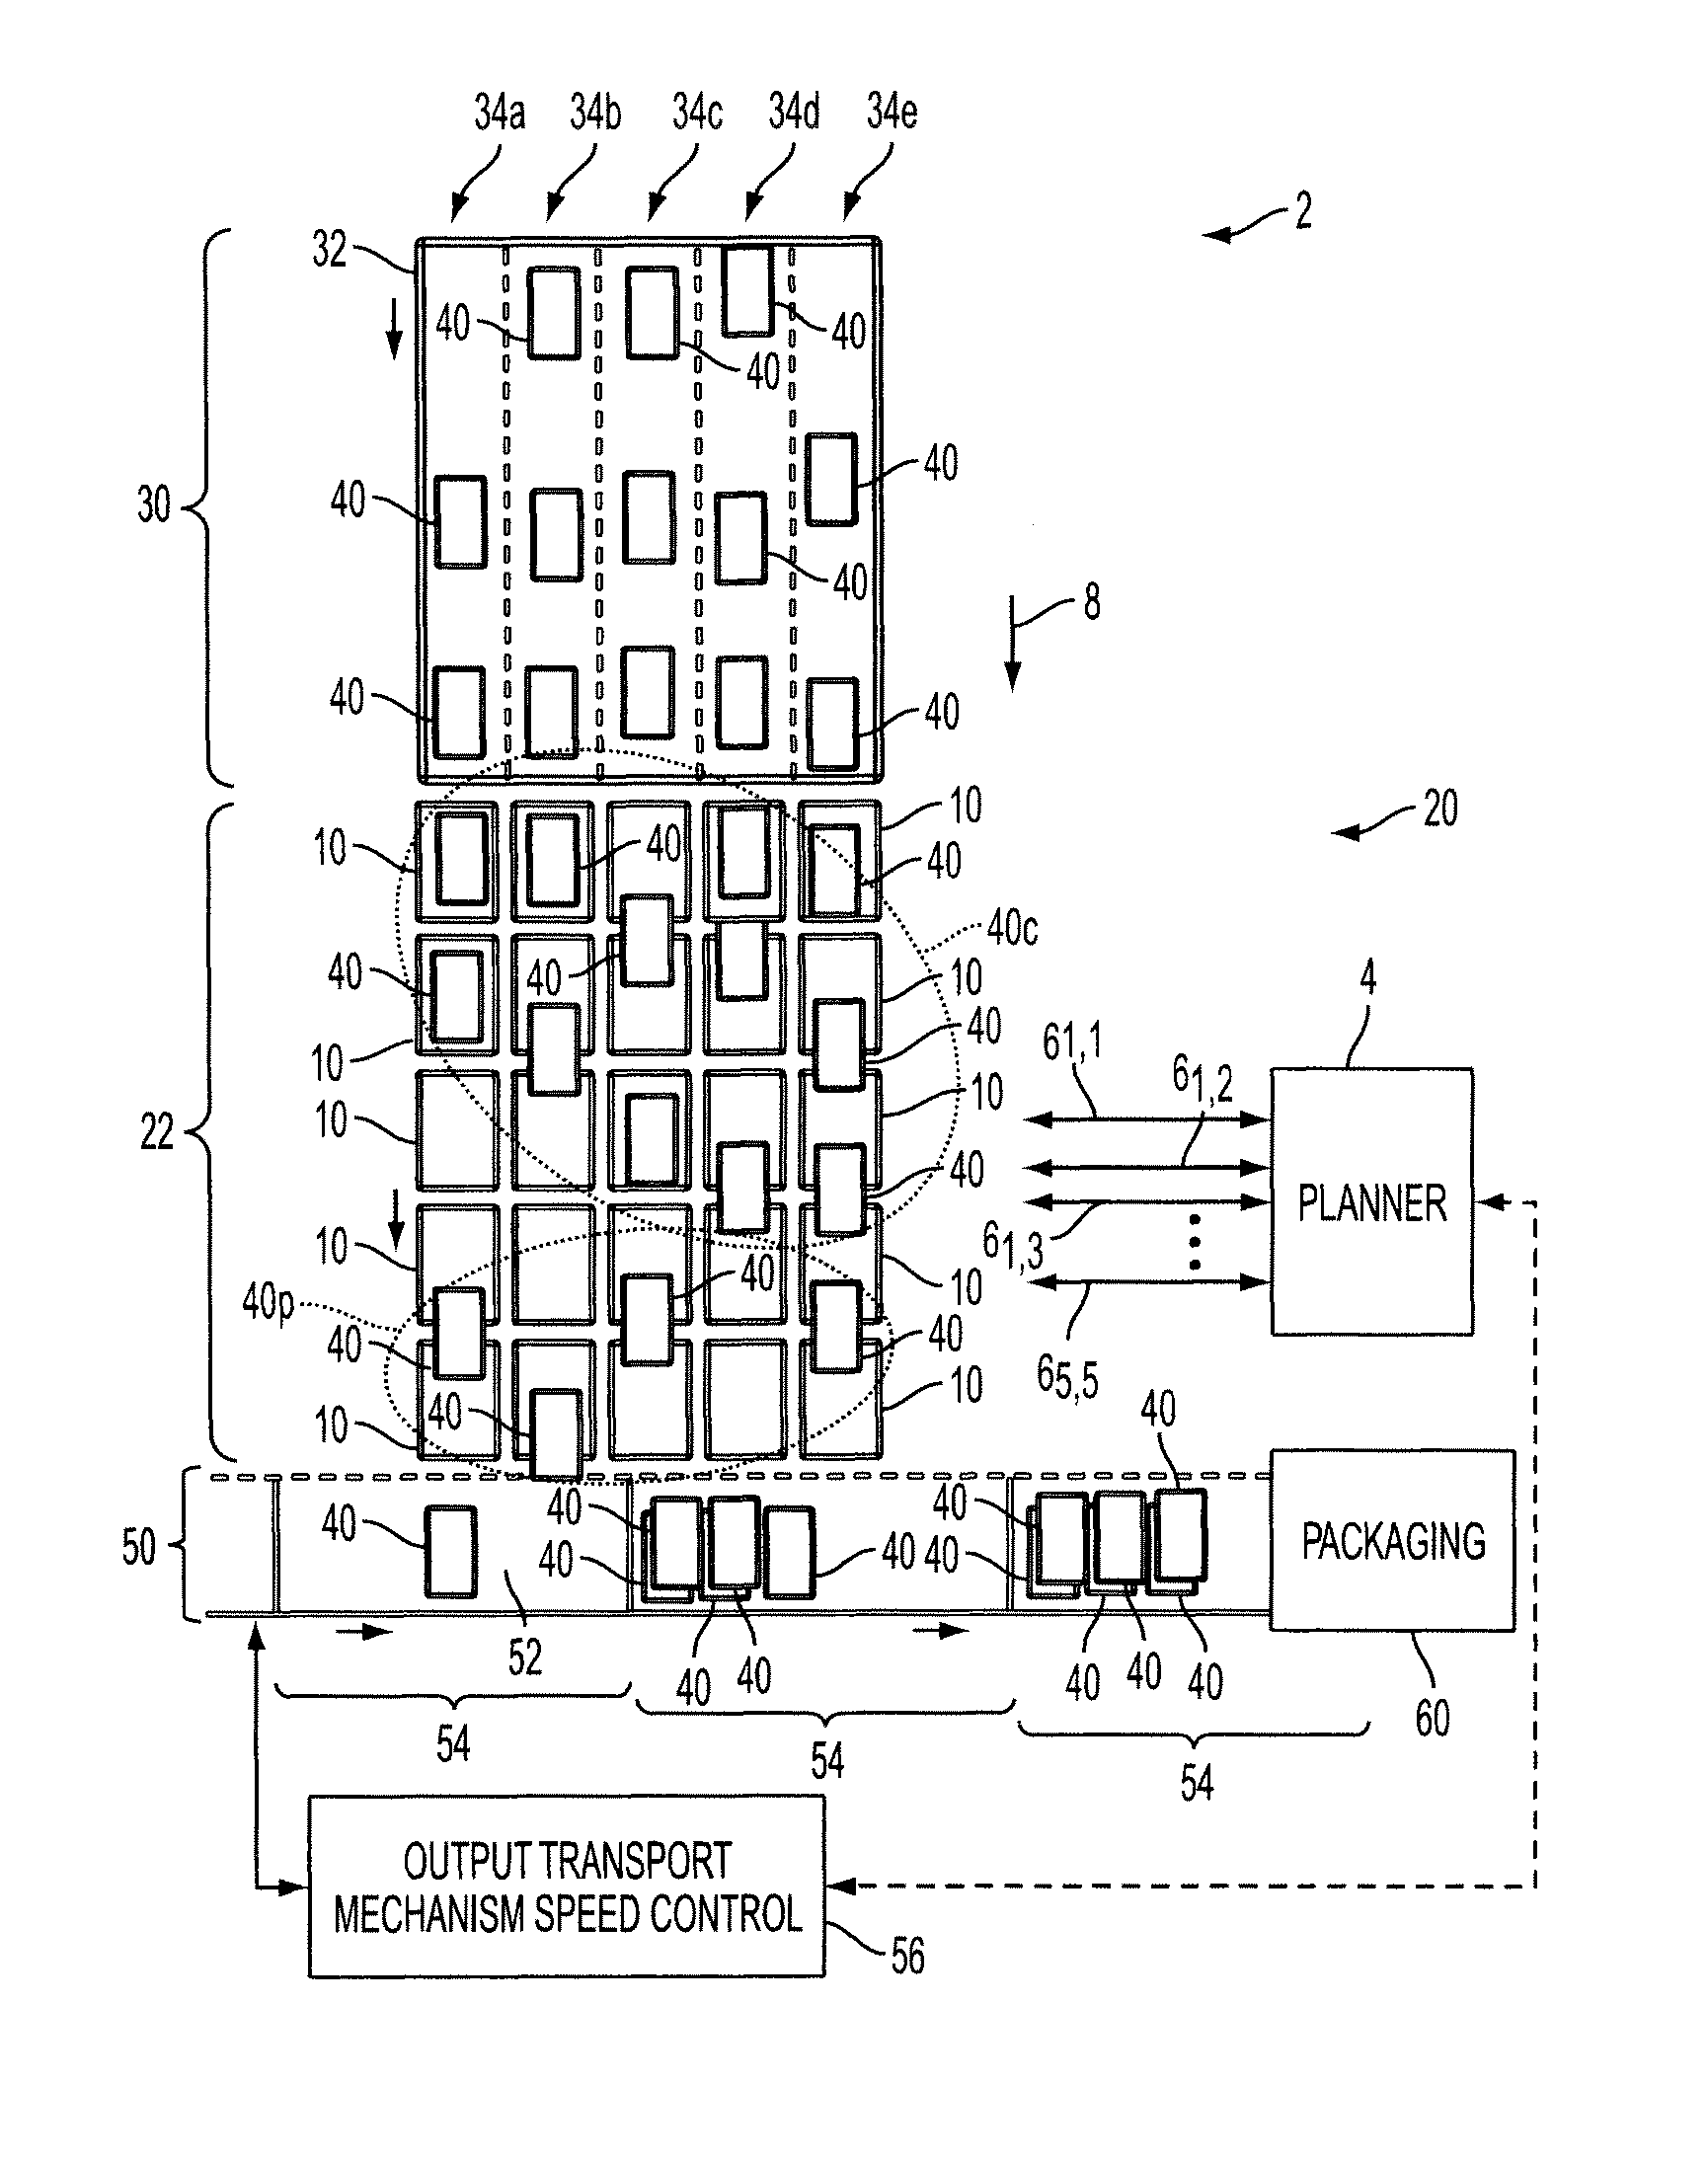 Intelligent product feed system and method